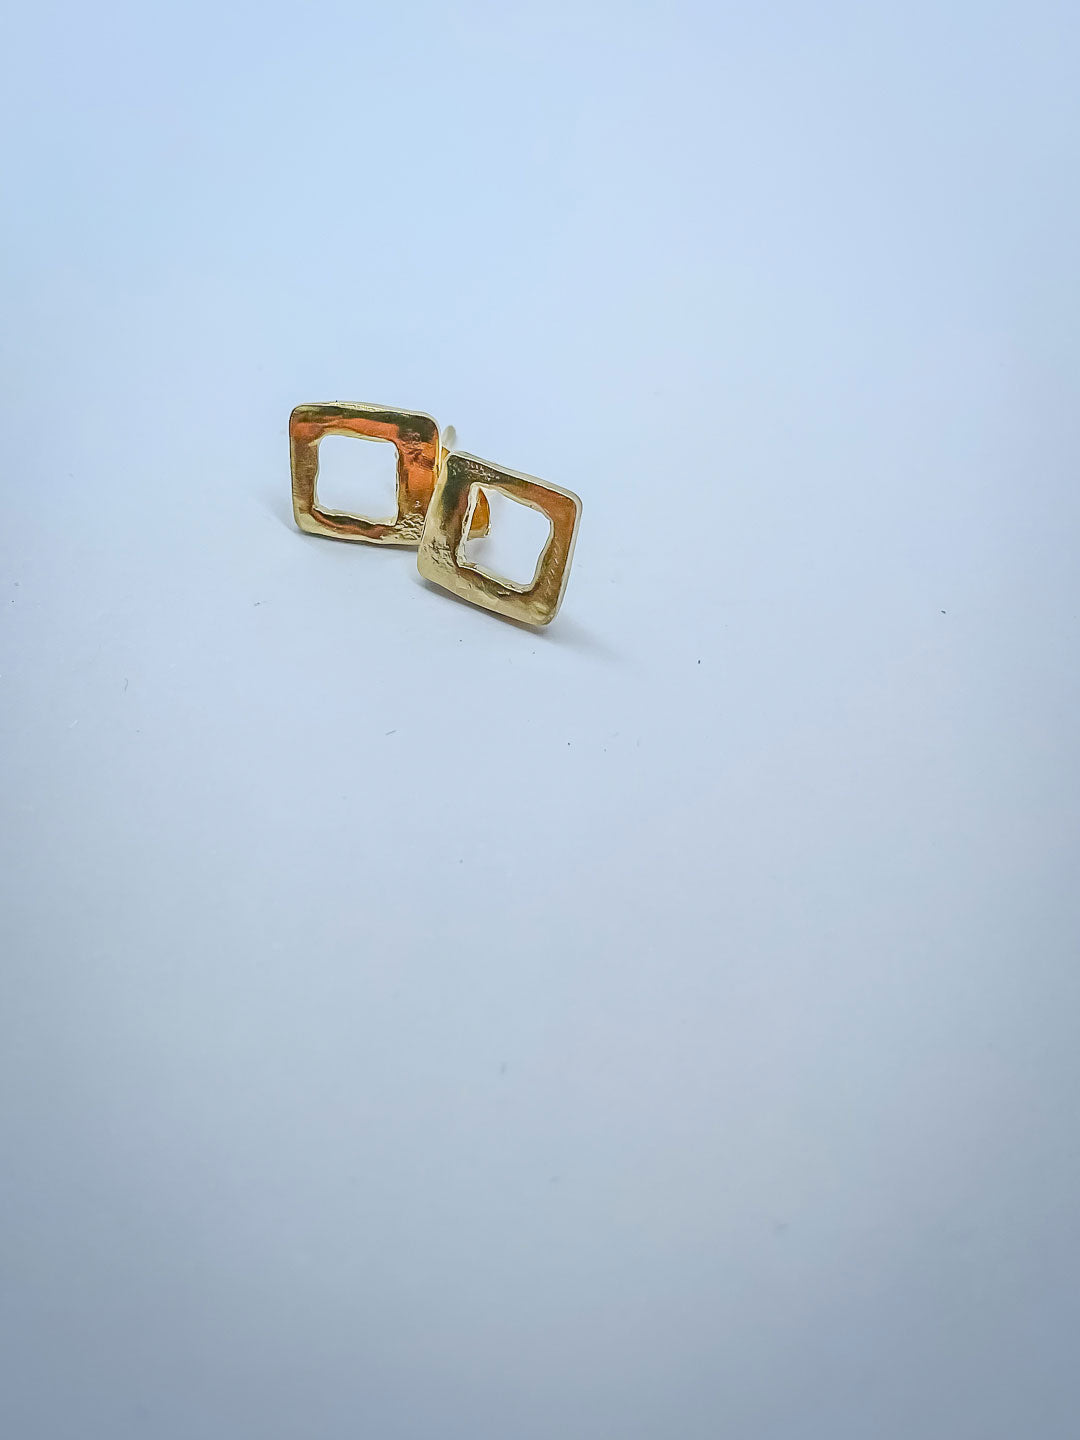 A pair of Gold open geometric form pierced earrings inspired by Mid Century Geometric Patterns. Deliberately left to show makers marks.